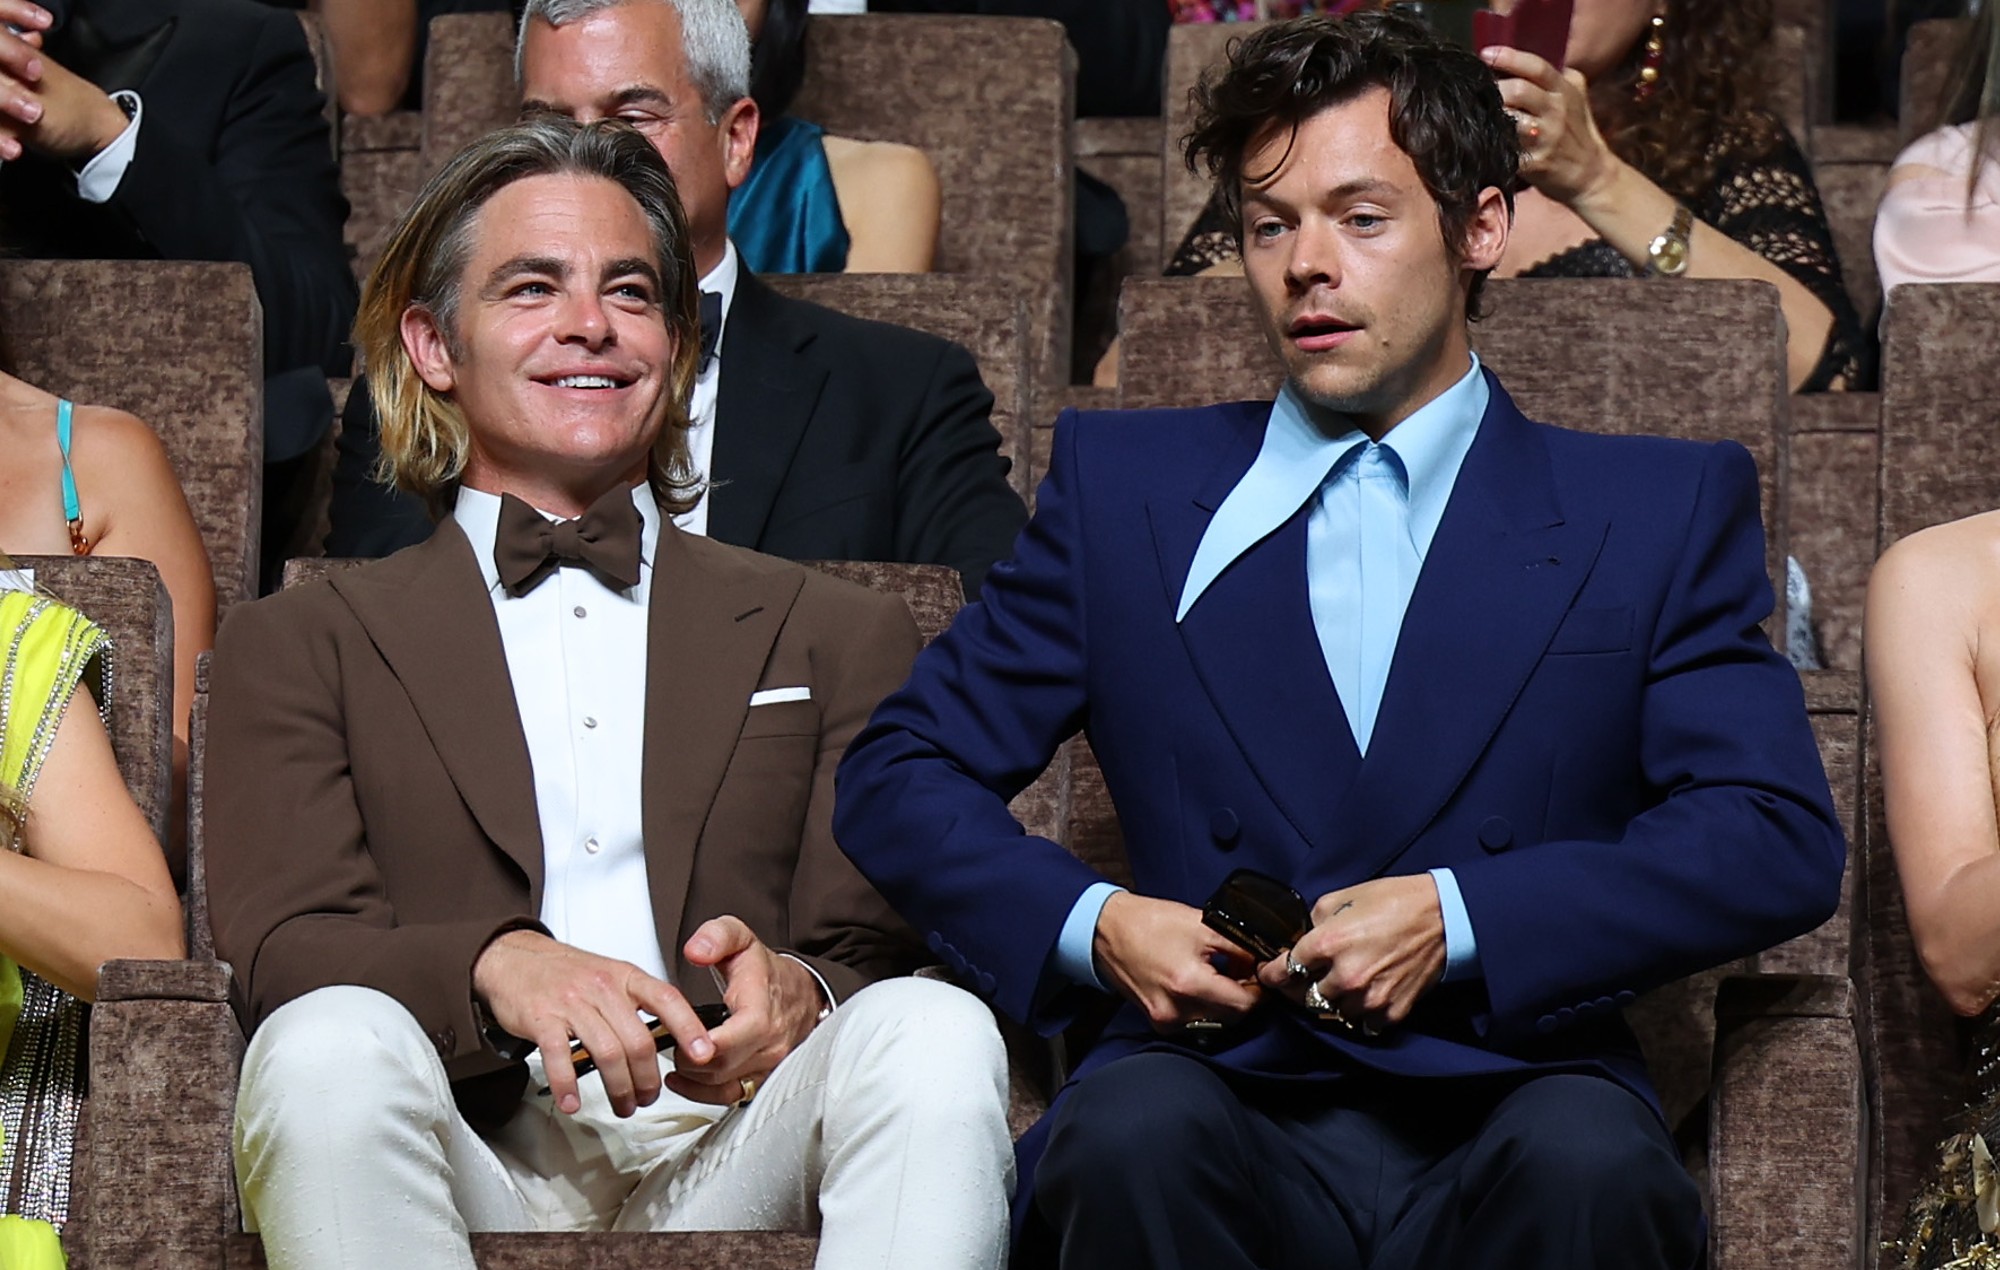 Chris Pine finally reveals whether ‘Don’t Worry Darling’ co-star Harry Styles spat on him at Venice Film Festival